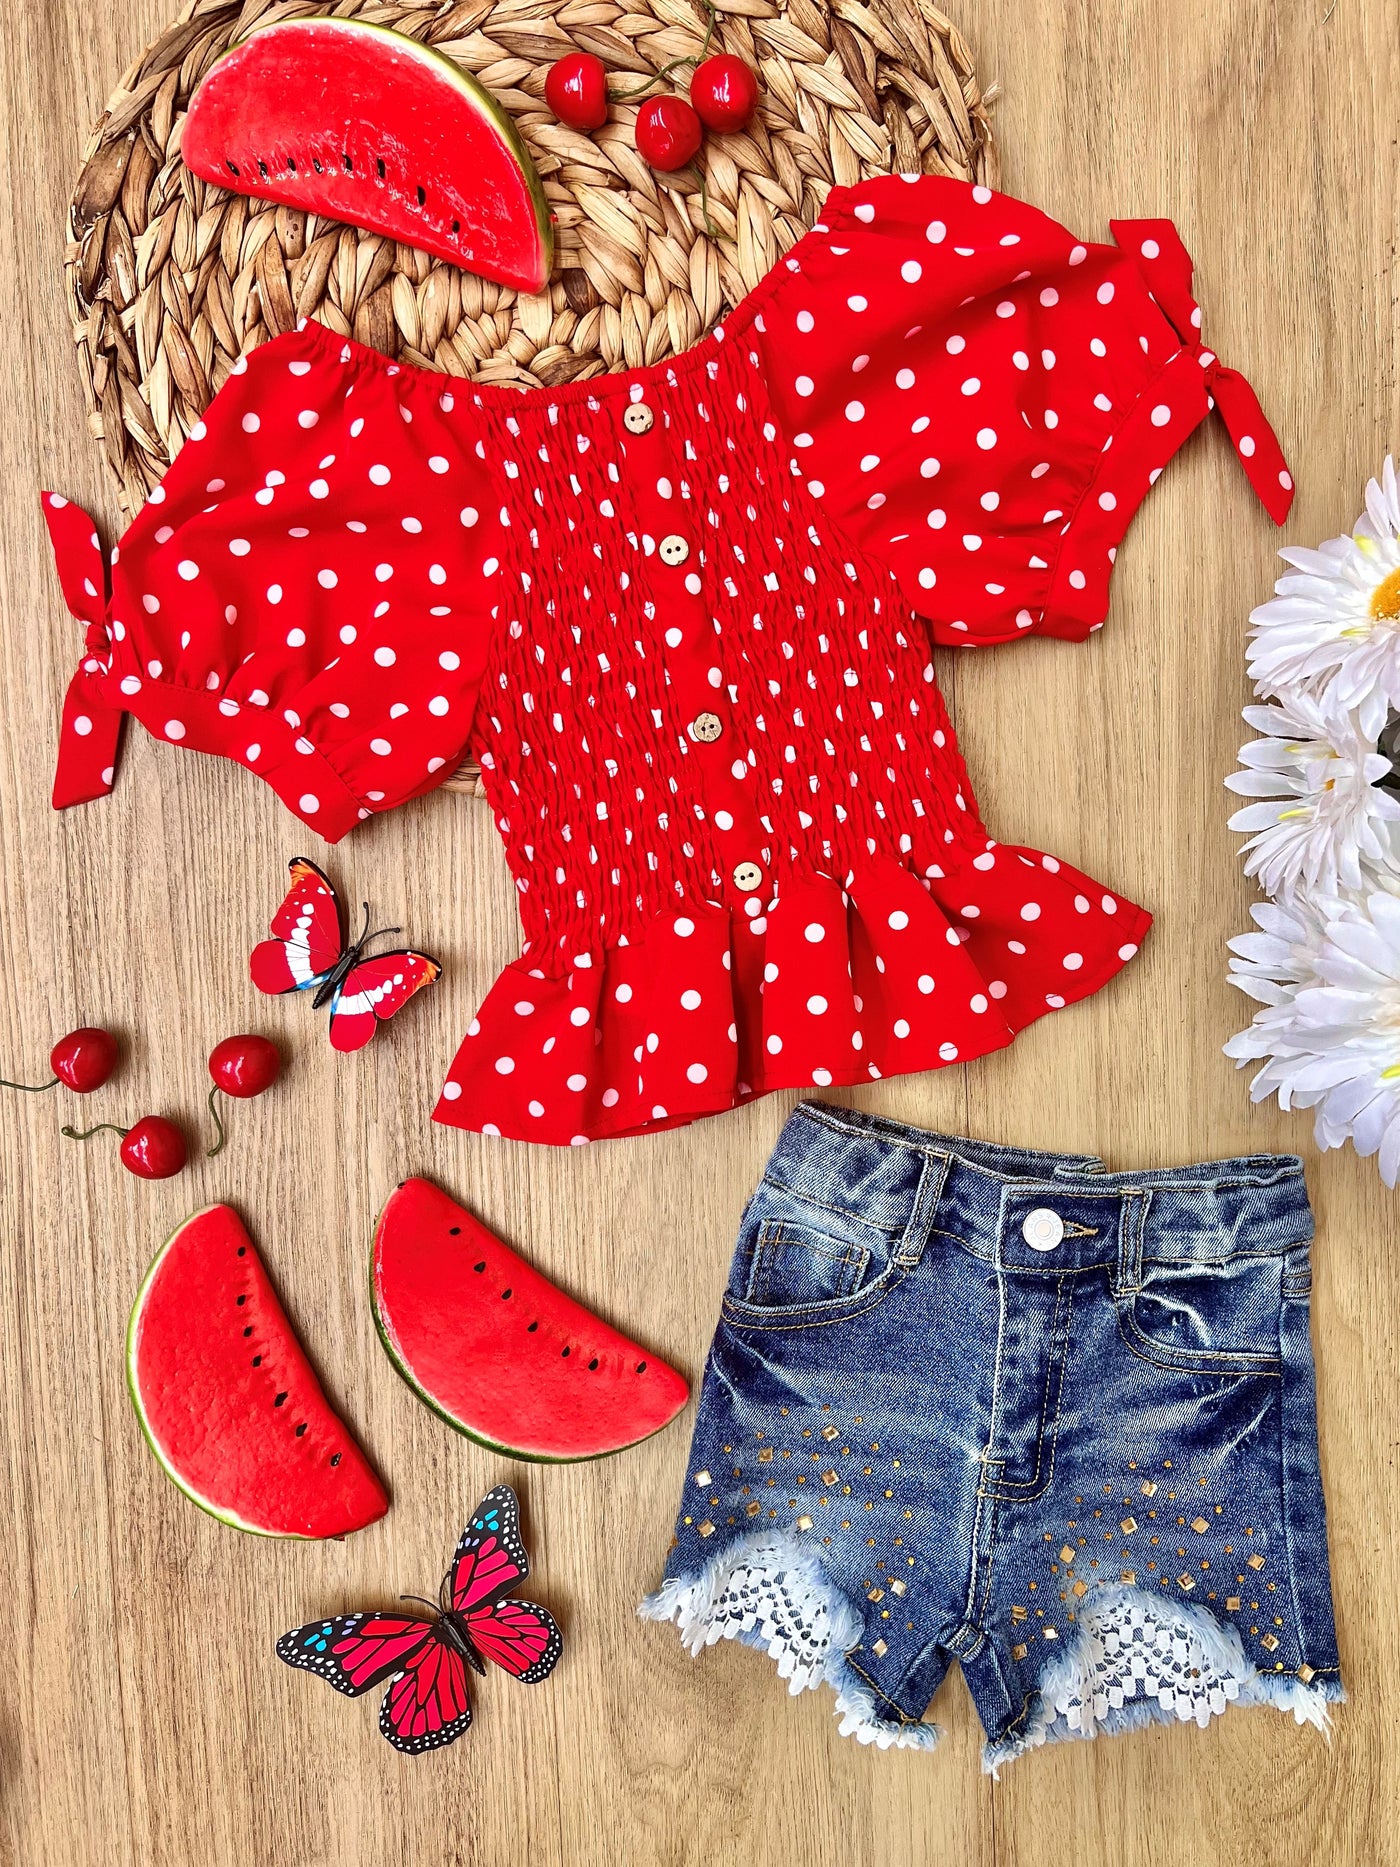 Girls Polka Dot Cutie Cap Sleeved Button Down Top and Lace Denim Shorts Set